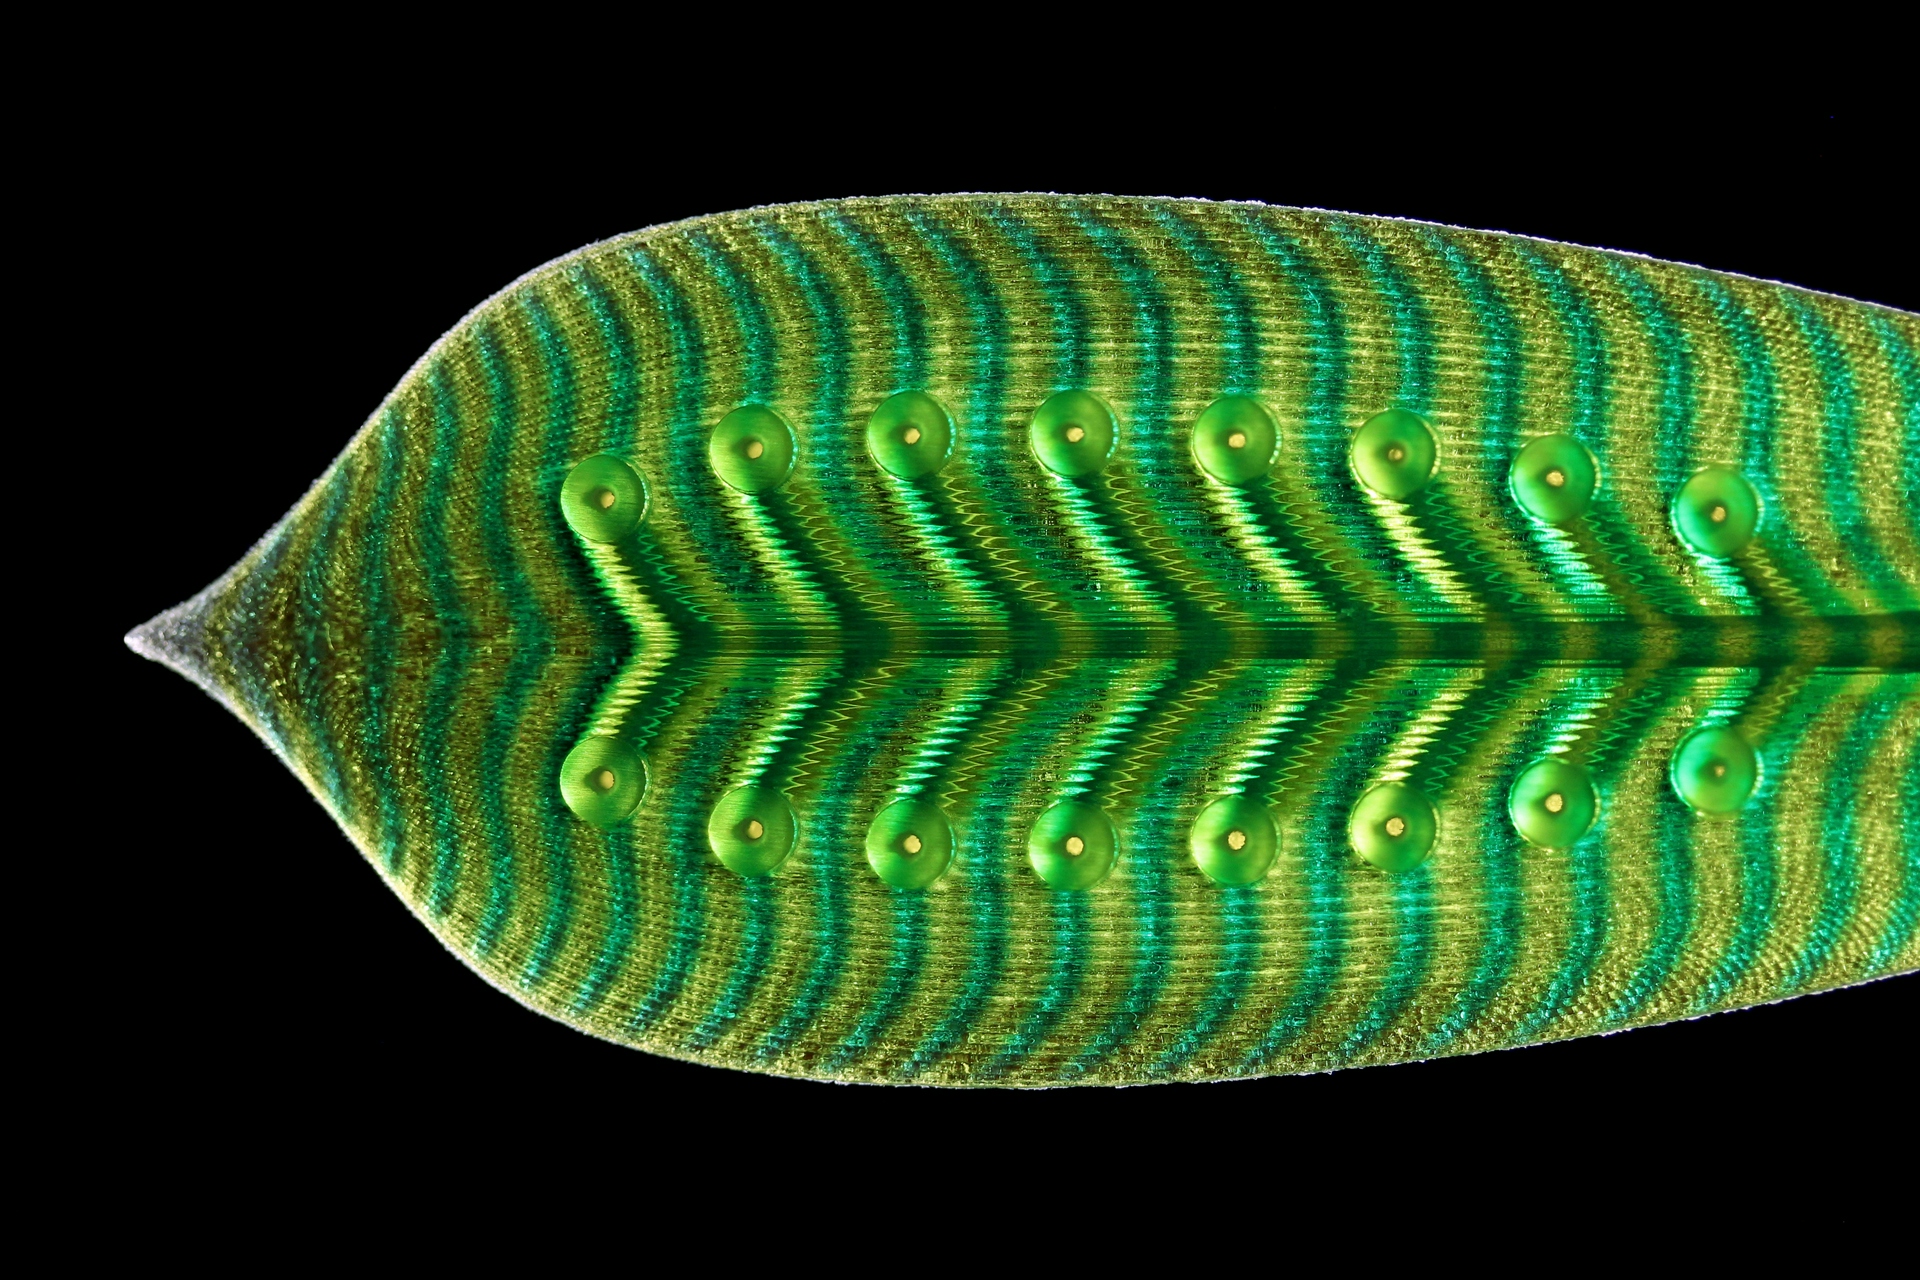 Close-up of 3D printed leaf blade showing intricate striped pattern.